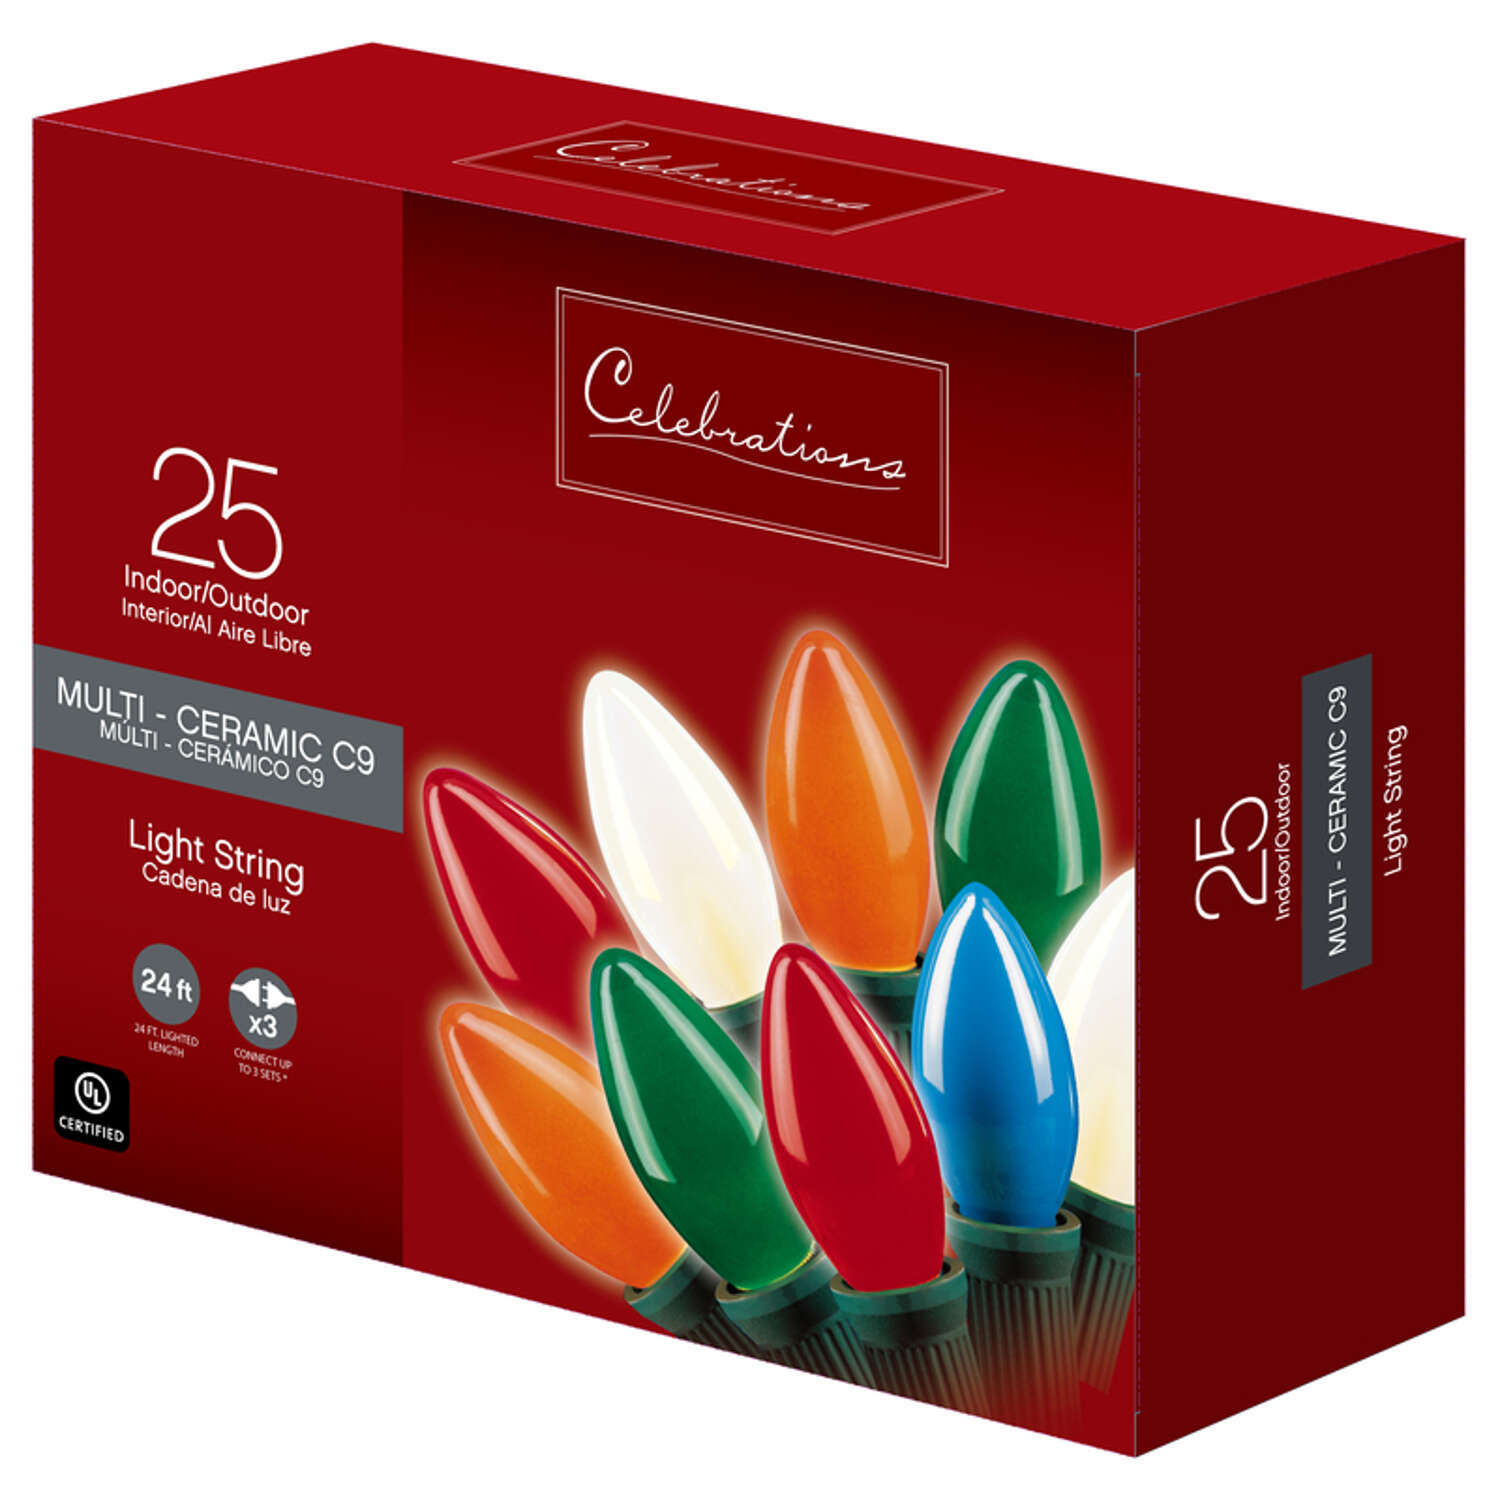 Celebrations 25 Indoor/Outdoor Ceramic C9 Lights 3 Available Pick Your Set 